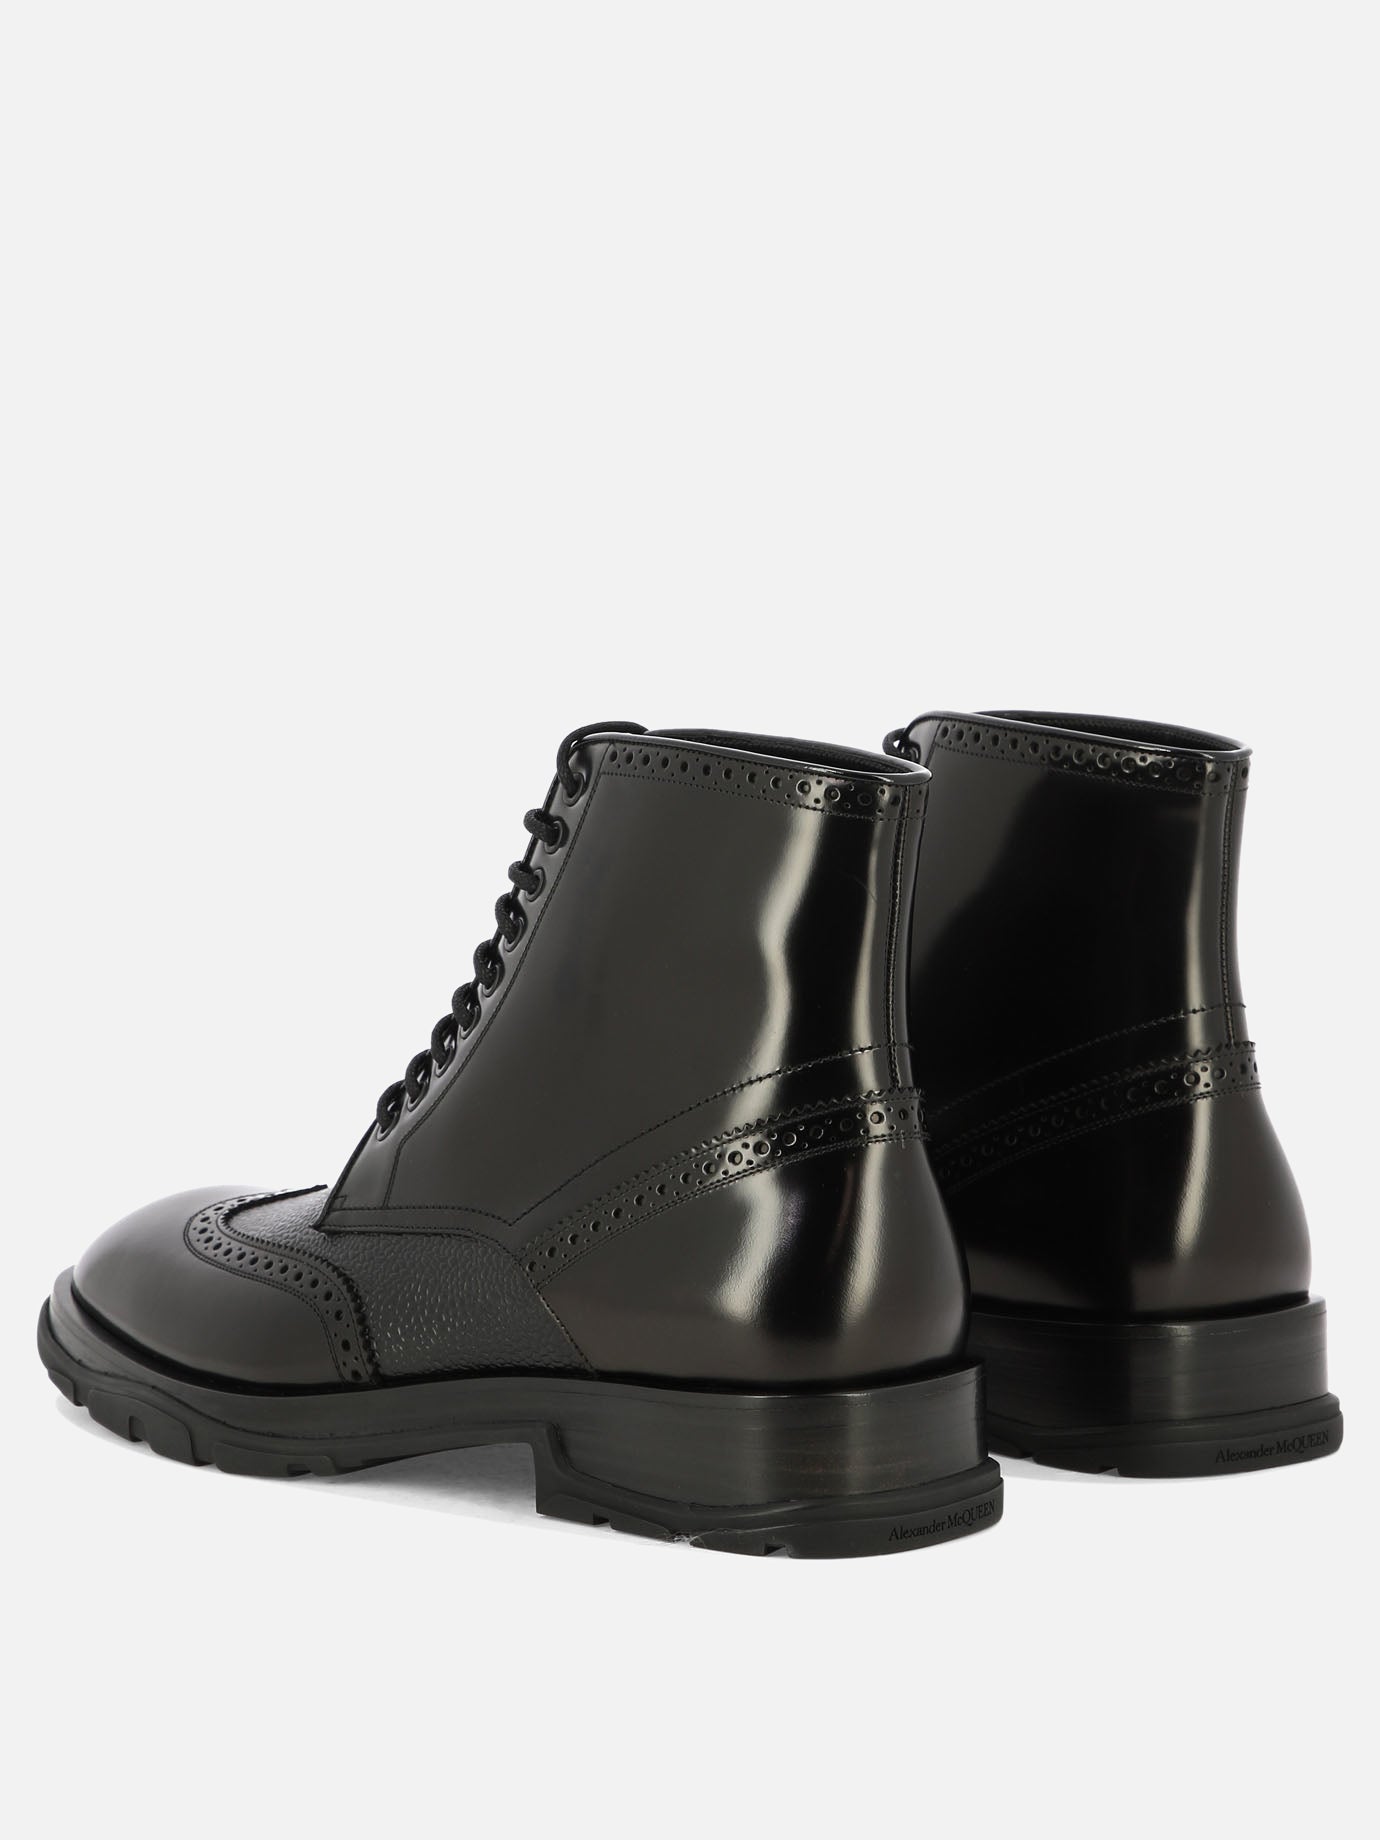 "Textured" lace-up boots